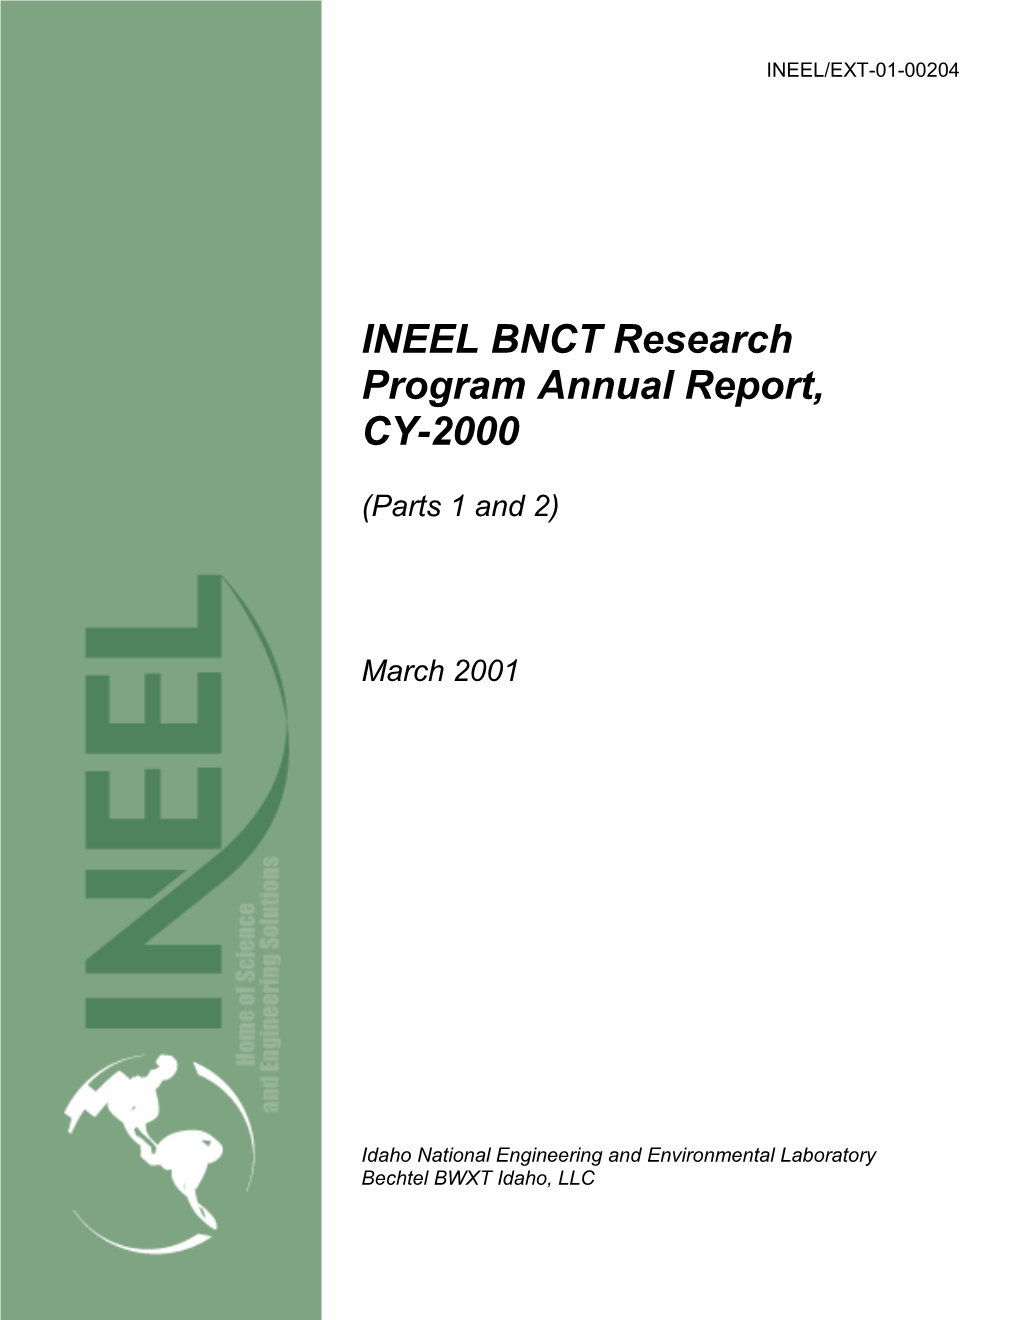 INEEL BNCT Research Program Annual Report, CY-2000